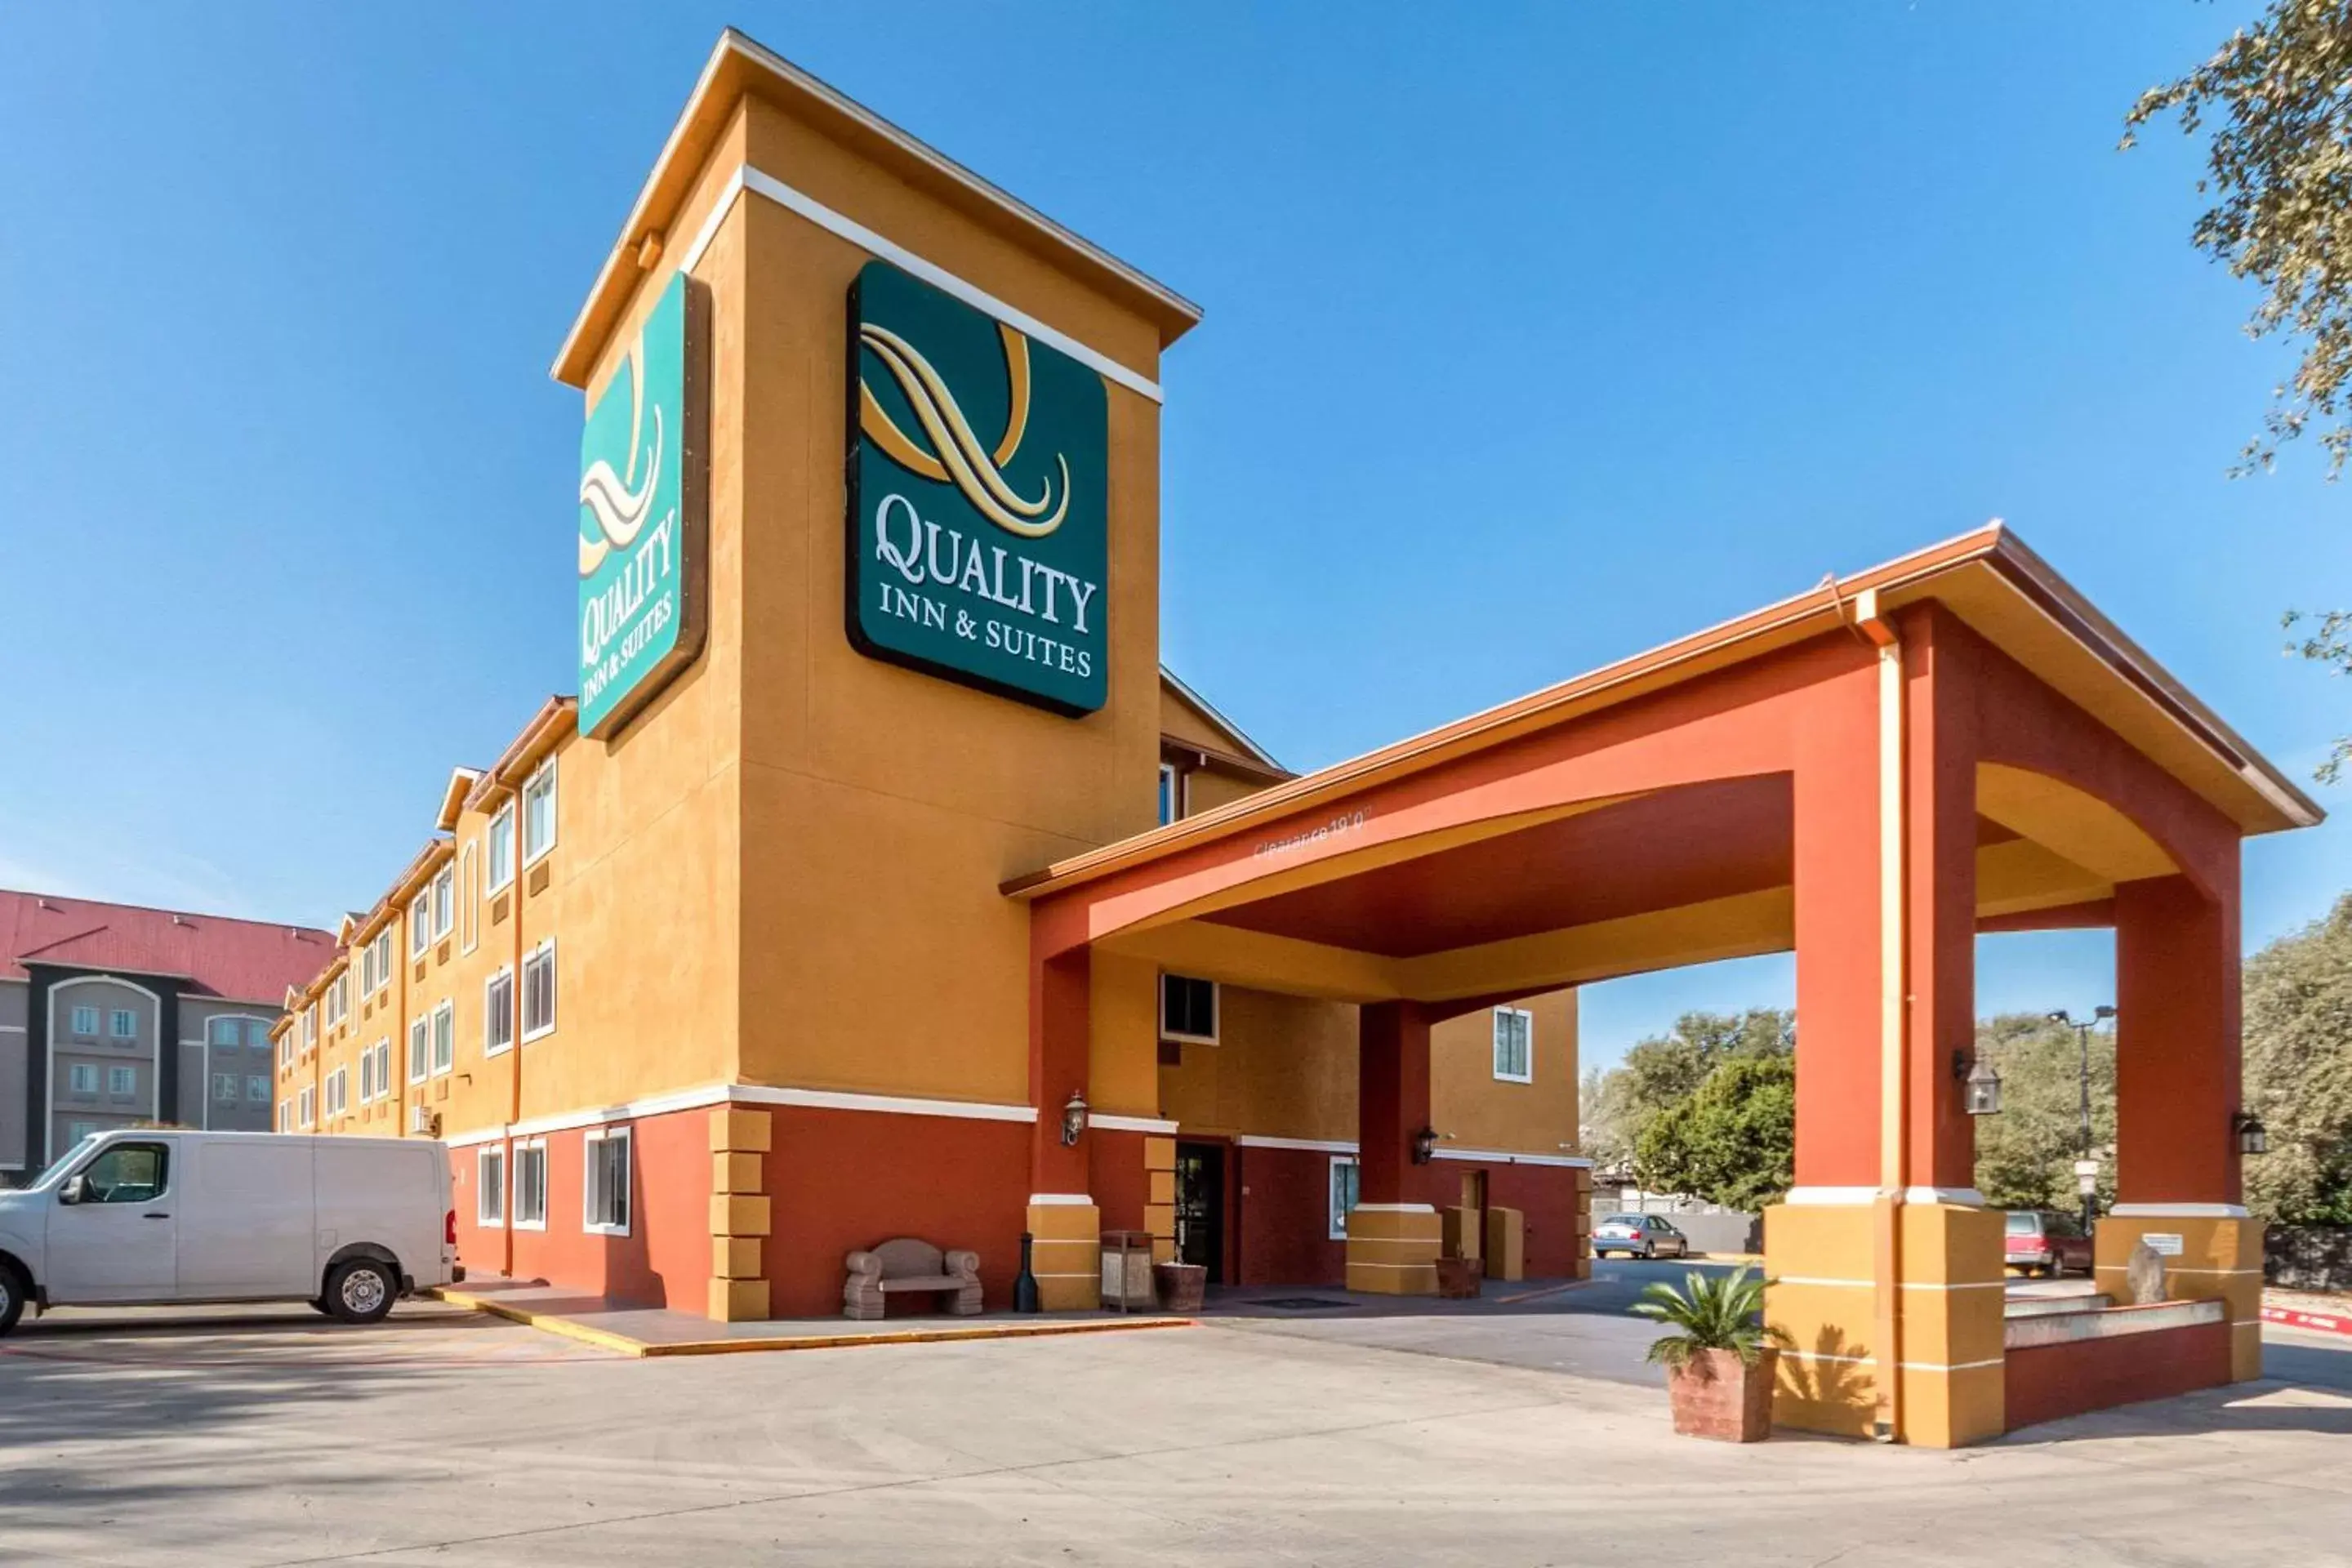 Property building in Quality Inn & Suites SeaWorld North